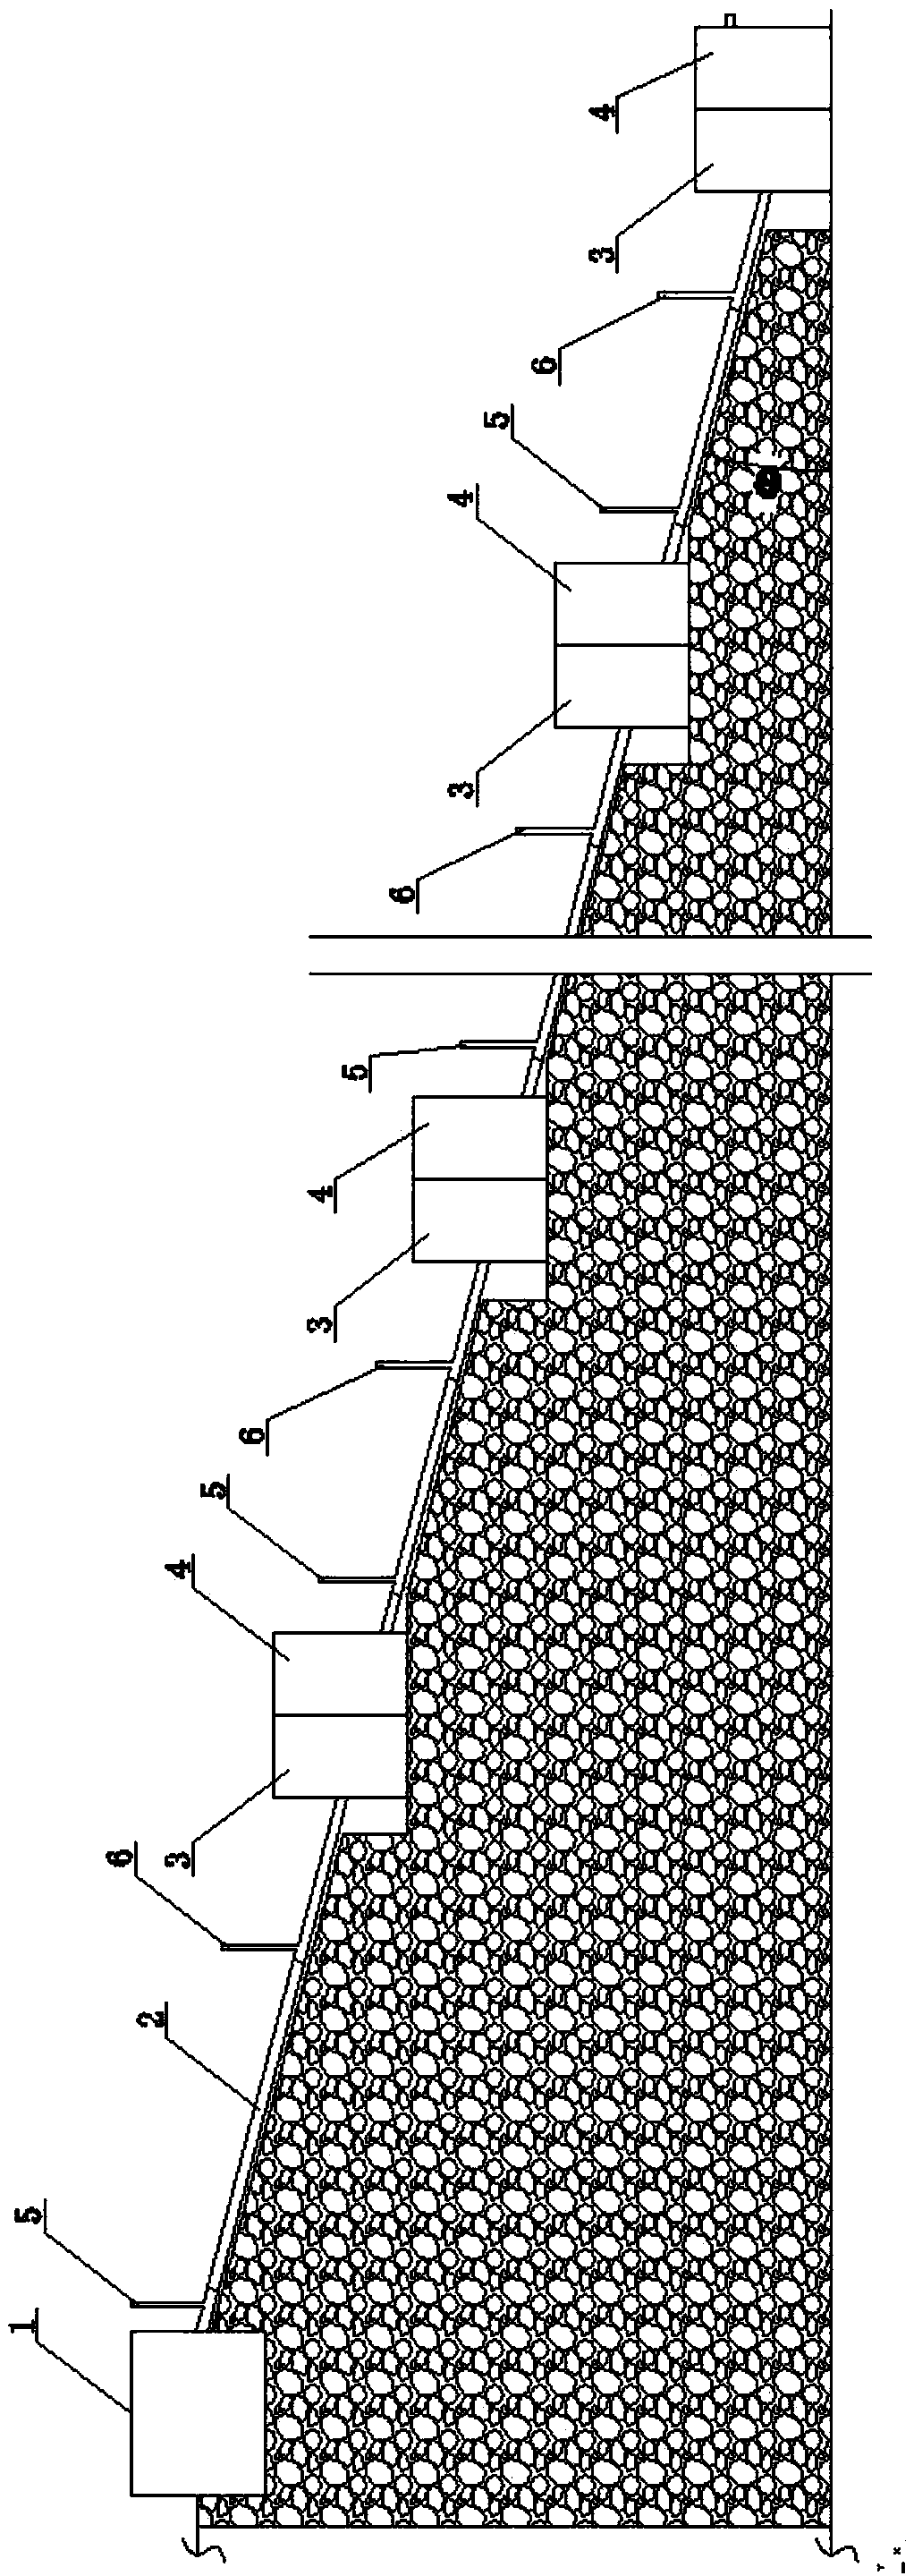 A multi-stage tubular cyclone oxygenated biological filter sewage treatment system and treatment method